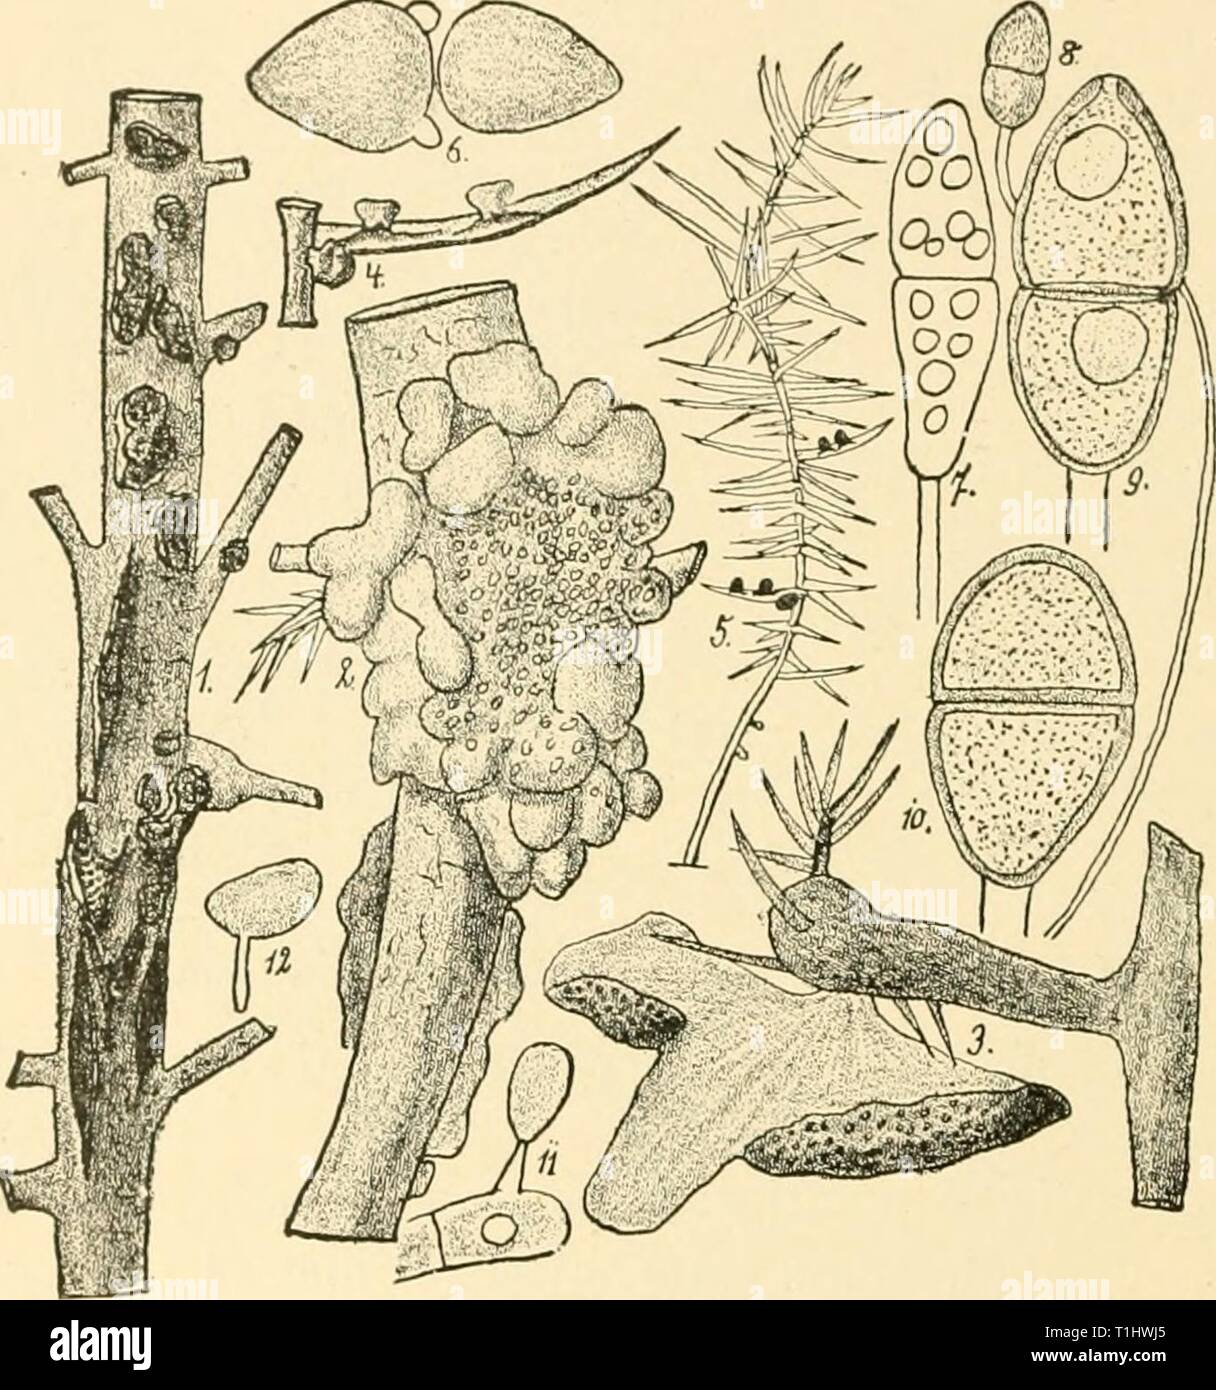 Diseases of plants induced by Diseases of plants induced by cryptogamic parasites; introduction to the study of pathogenic Fungi, slime-Fungi, bacteria, & Algae  diseasesofplants00tube Year: 1897  392 UKEDINEAE. than those of G. tremelloidcs. Tlie aecidiospores—Roestclia cormda—occur on species of Pyrns {Sorhus)] they are much smaller than those of Rorstclia pcnicillata. The Roestclia themselves are long, curved, and horn-like, while the walls of the peridial cells are beset with short processes (Fig. 224). Where Pijrus Aucuparia occurs mixed with Pyrus Malus, it has been observed that Roestcl Stock Photo